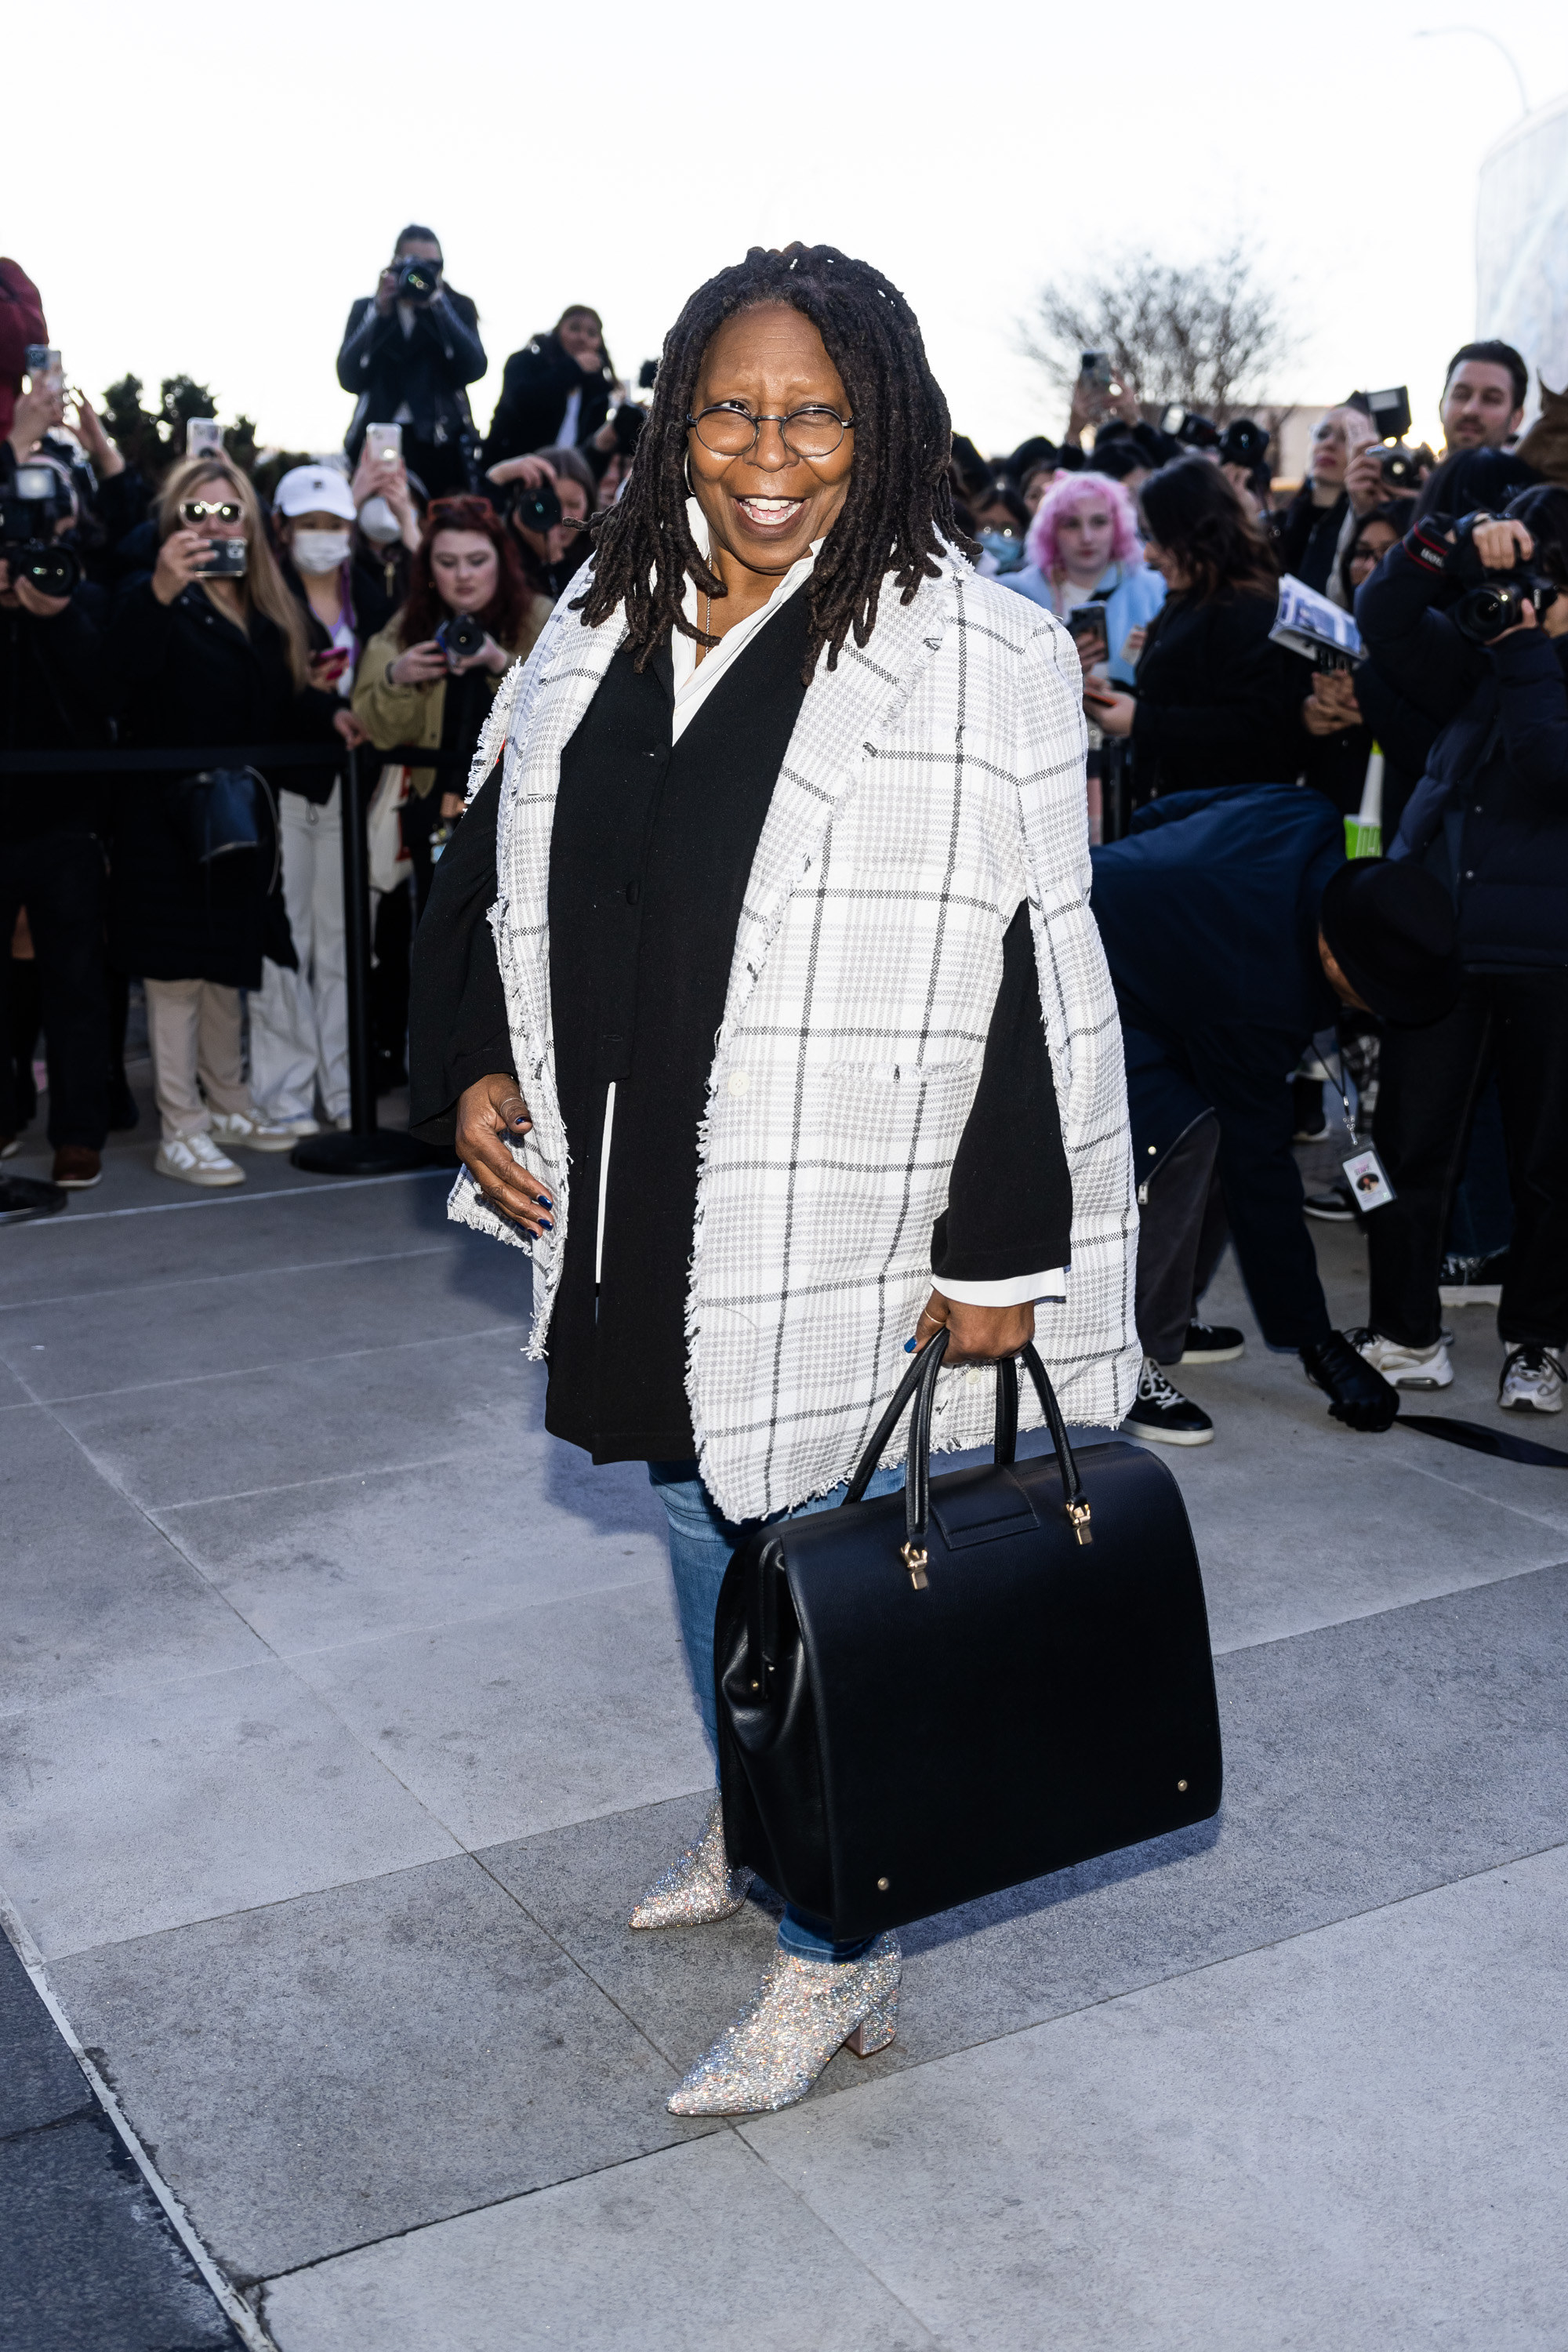 Whoopi standing outside in a plaid jacket, jeans, and sequined boots as photographers take her photo